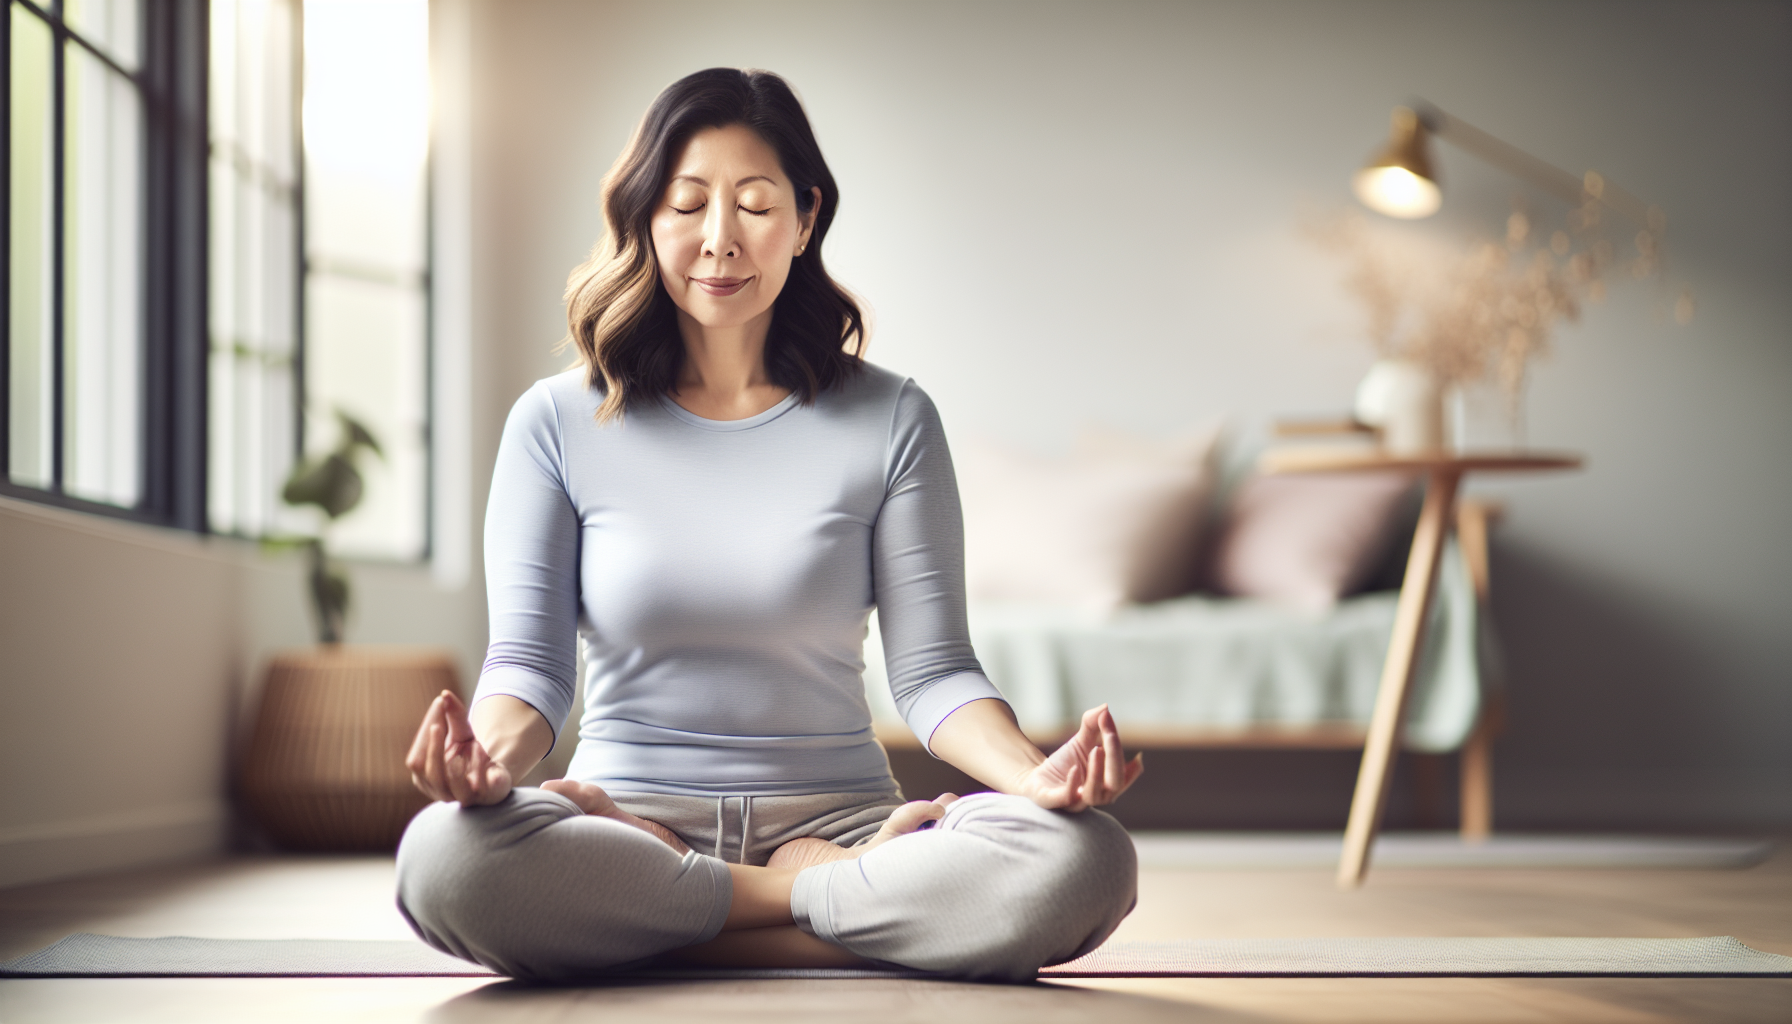 Practicing mindfulness for intuitive awareness